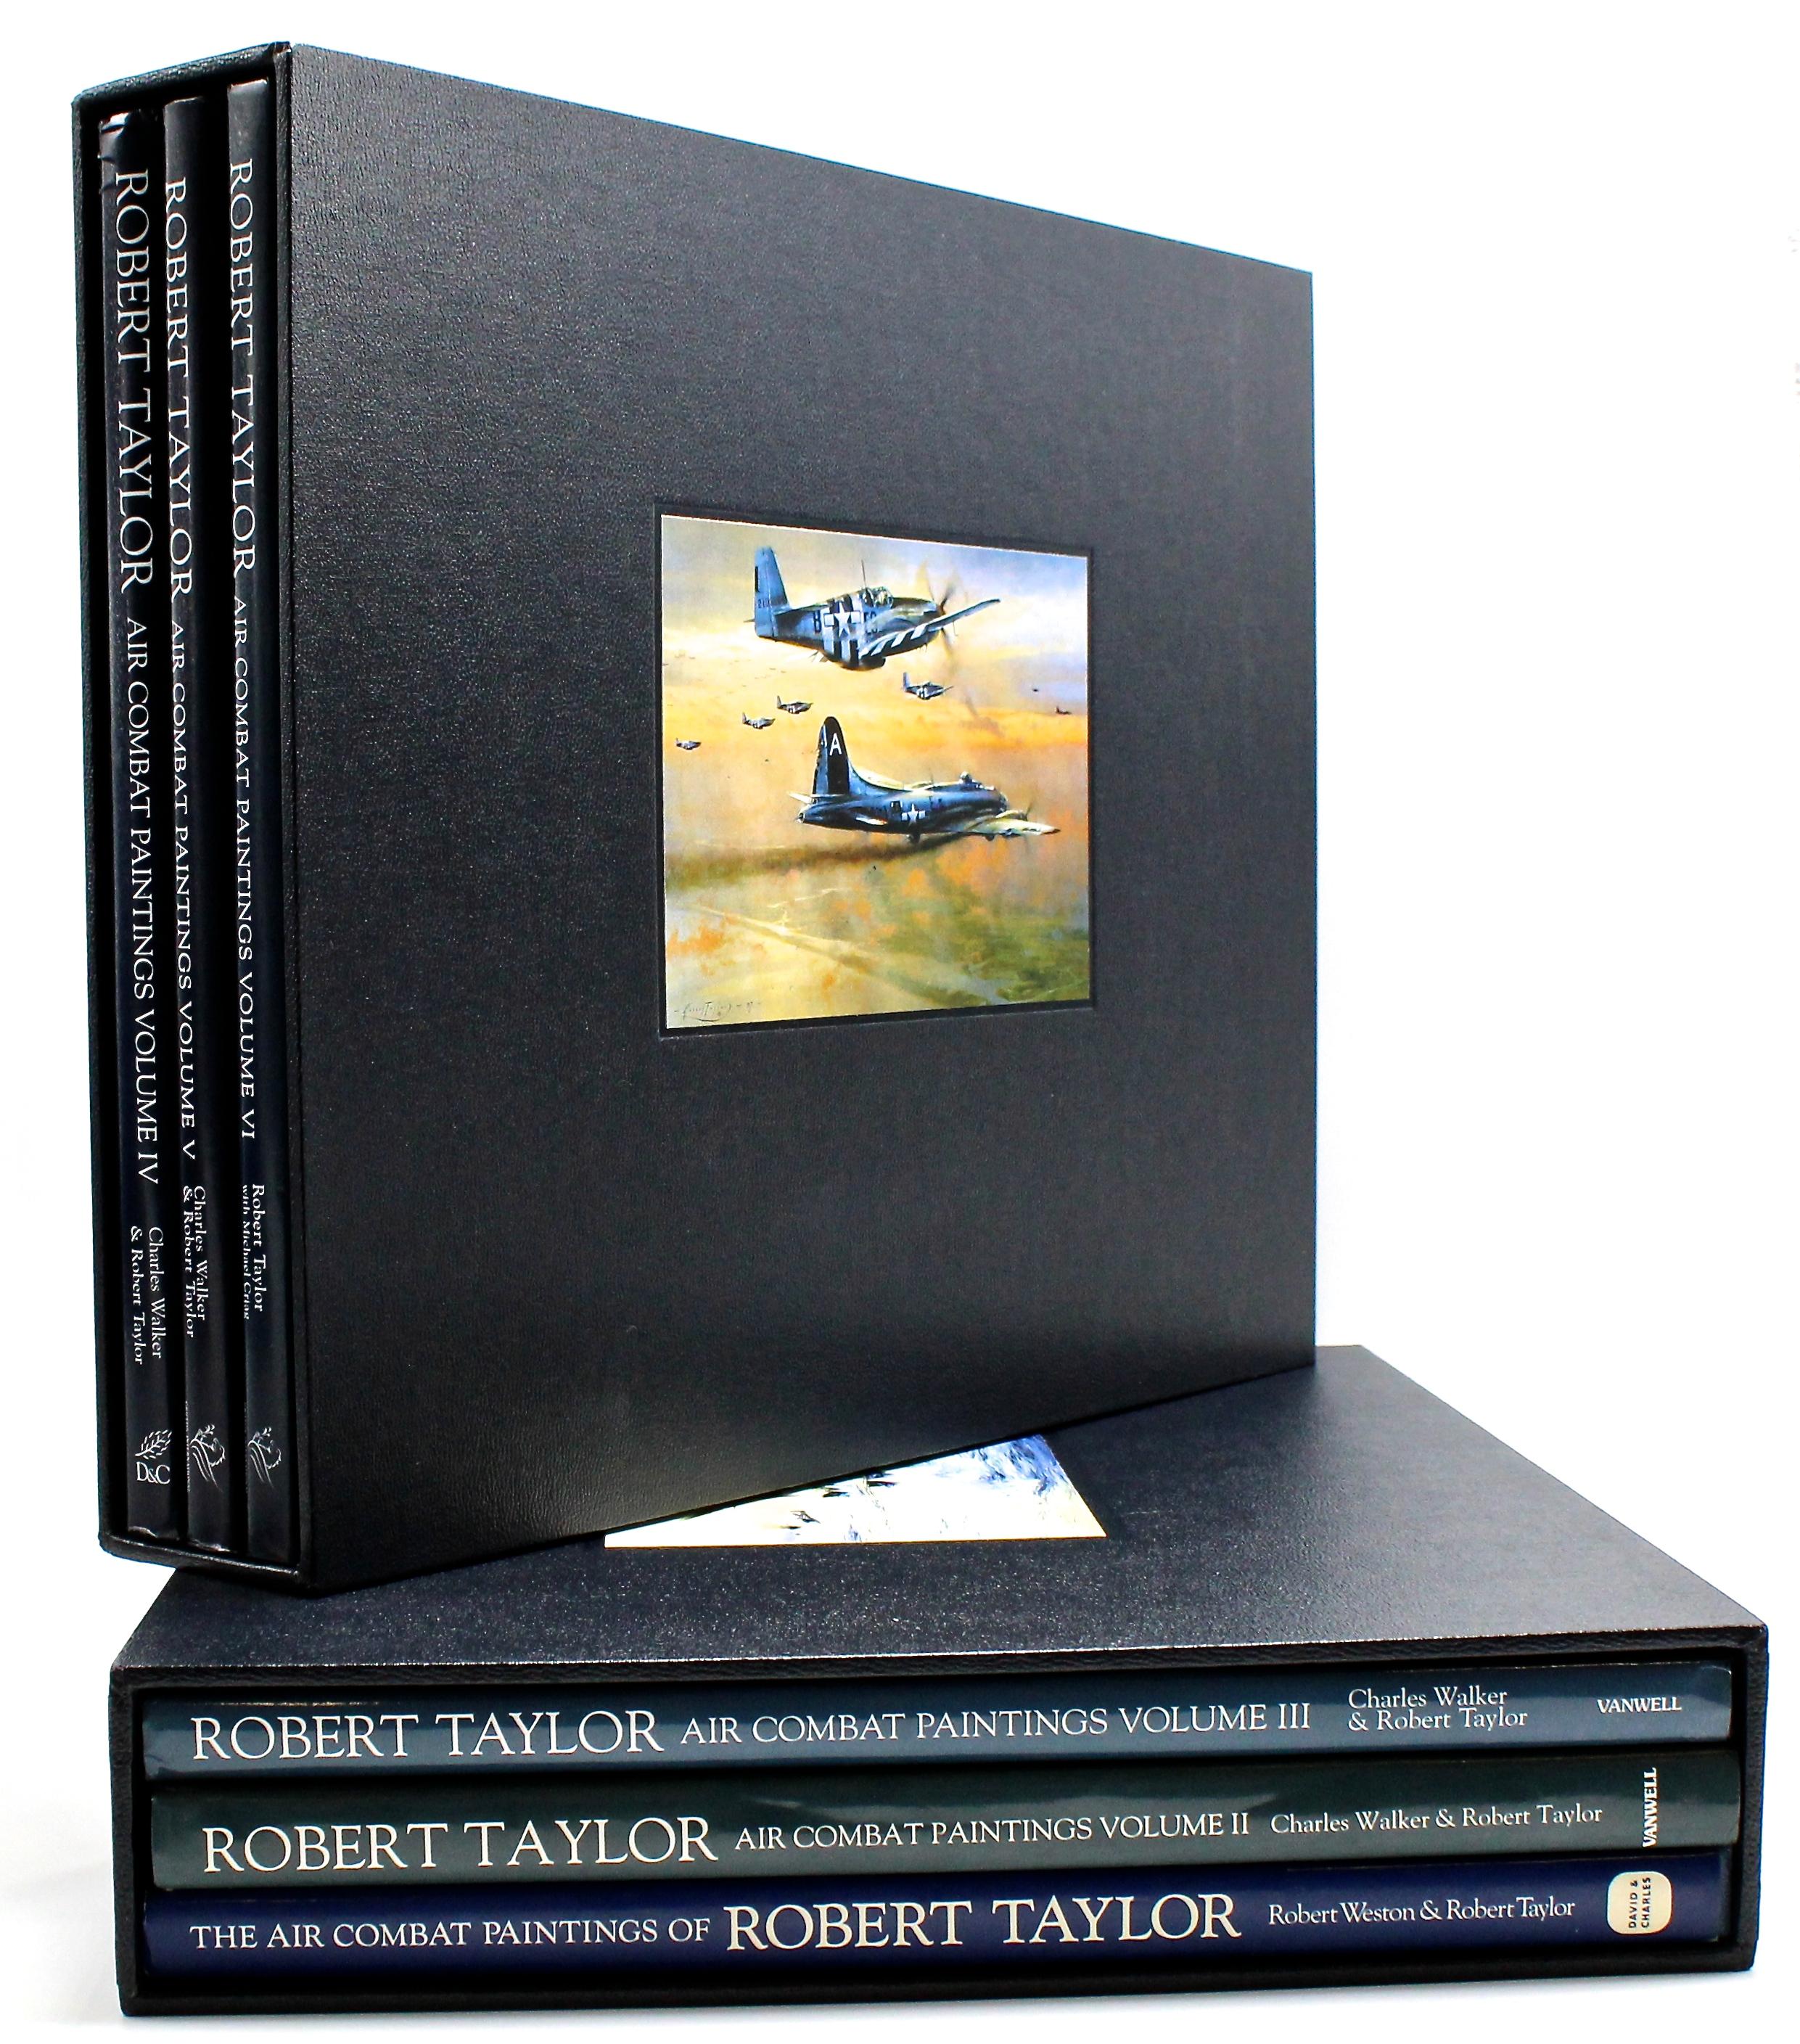 Taylor, Robert and Charles Walker. The Air Combat Paintings of Robert Taylor. Published 1990-2009 by various publishers. Six-volume set signed and inscribed two times by Taylor and signed throughout by 51 fighter pilots. Presented in custom archival